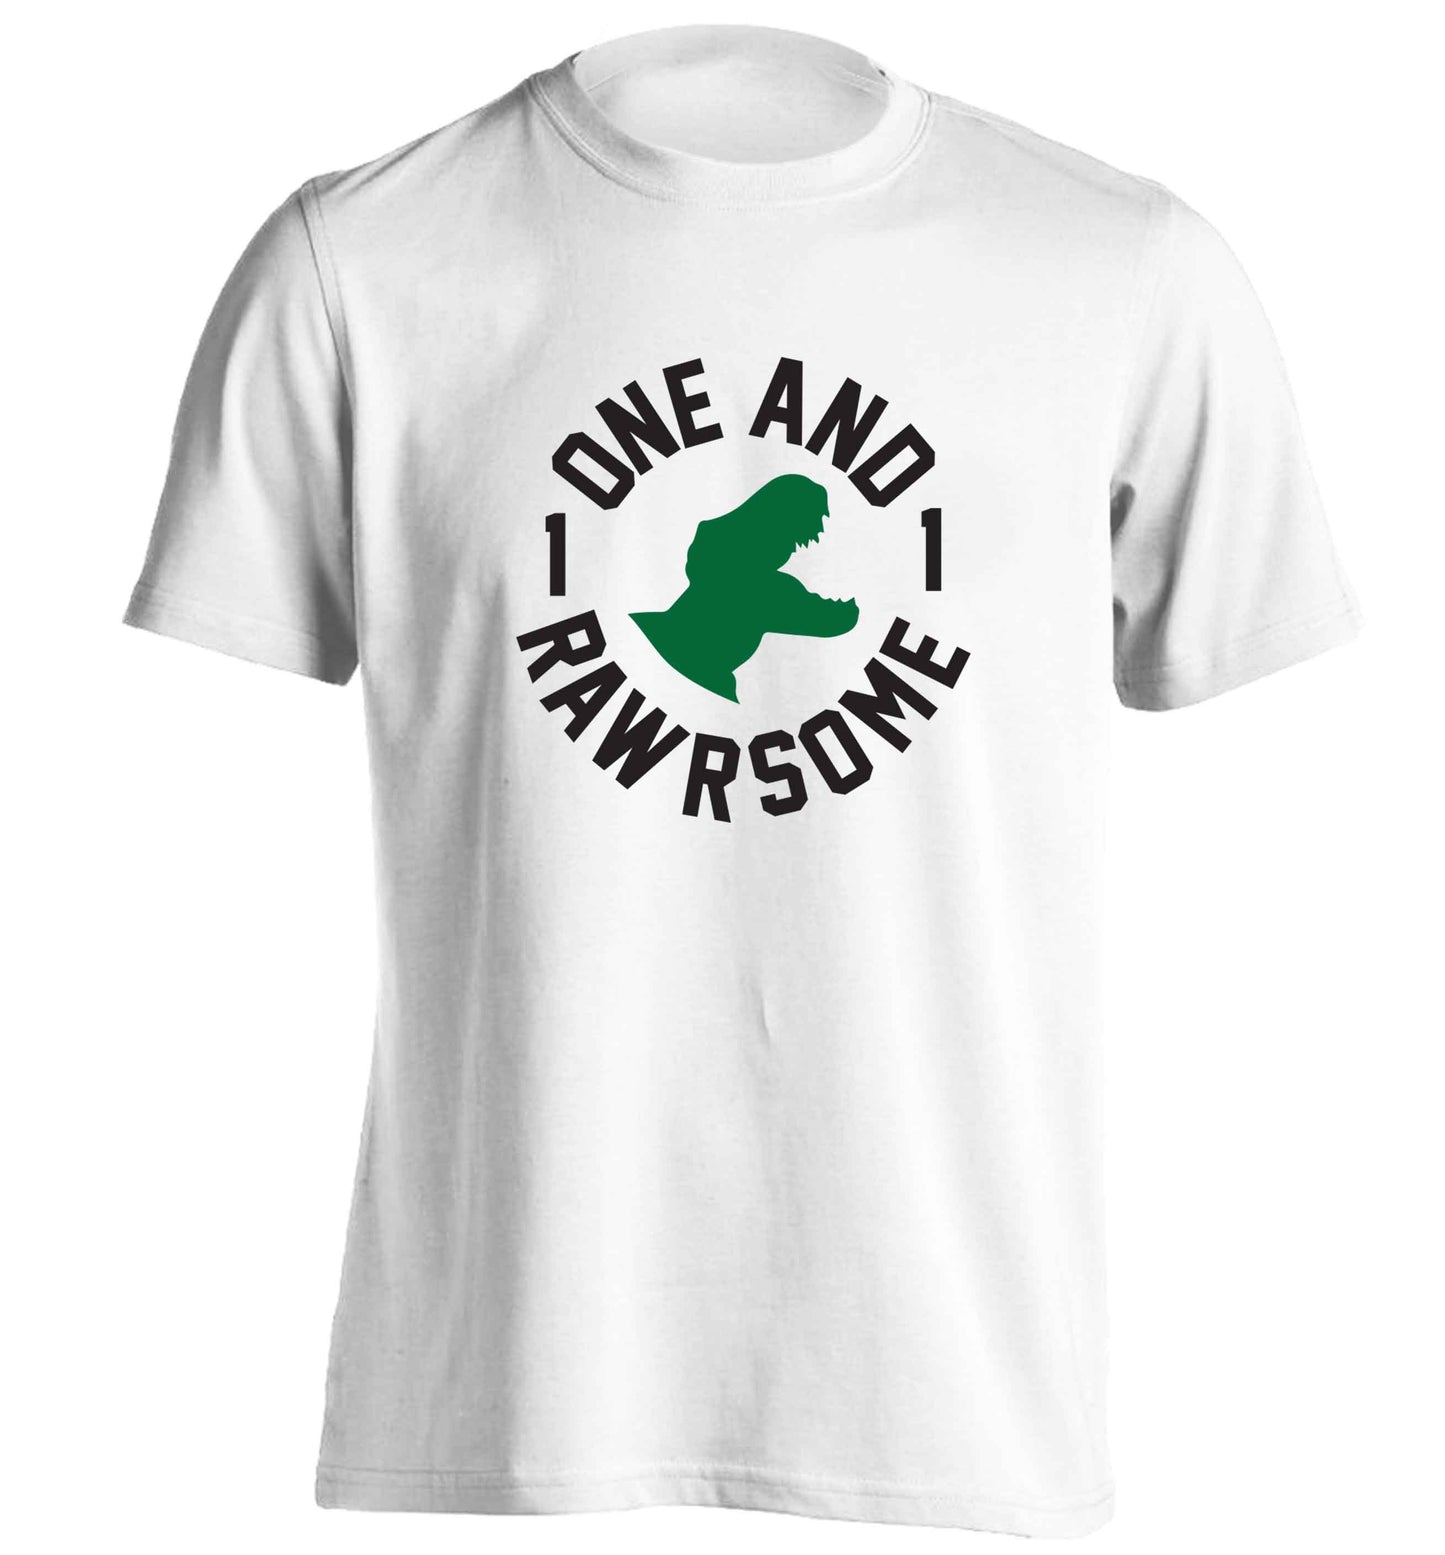 One and Rawrsome adults unisex white Tshirt 2XL